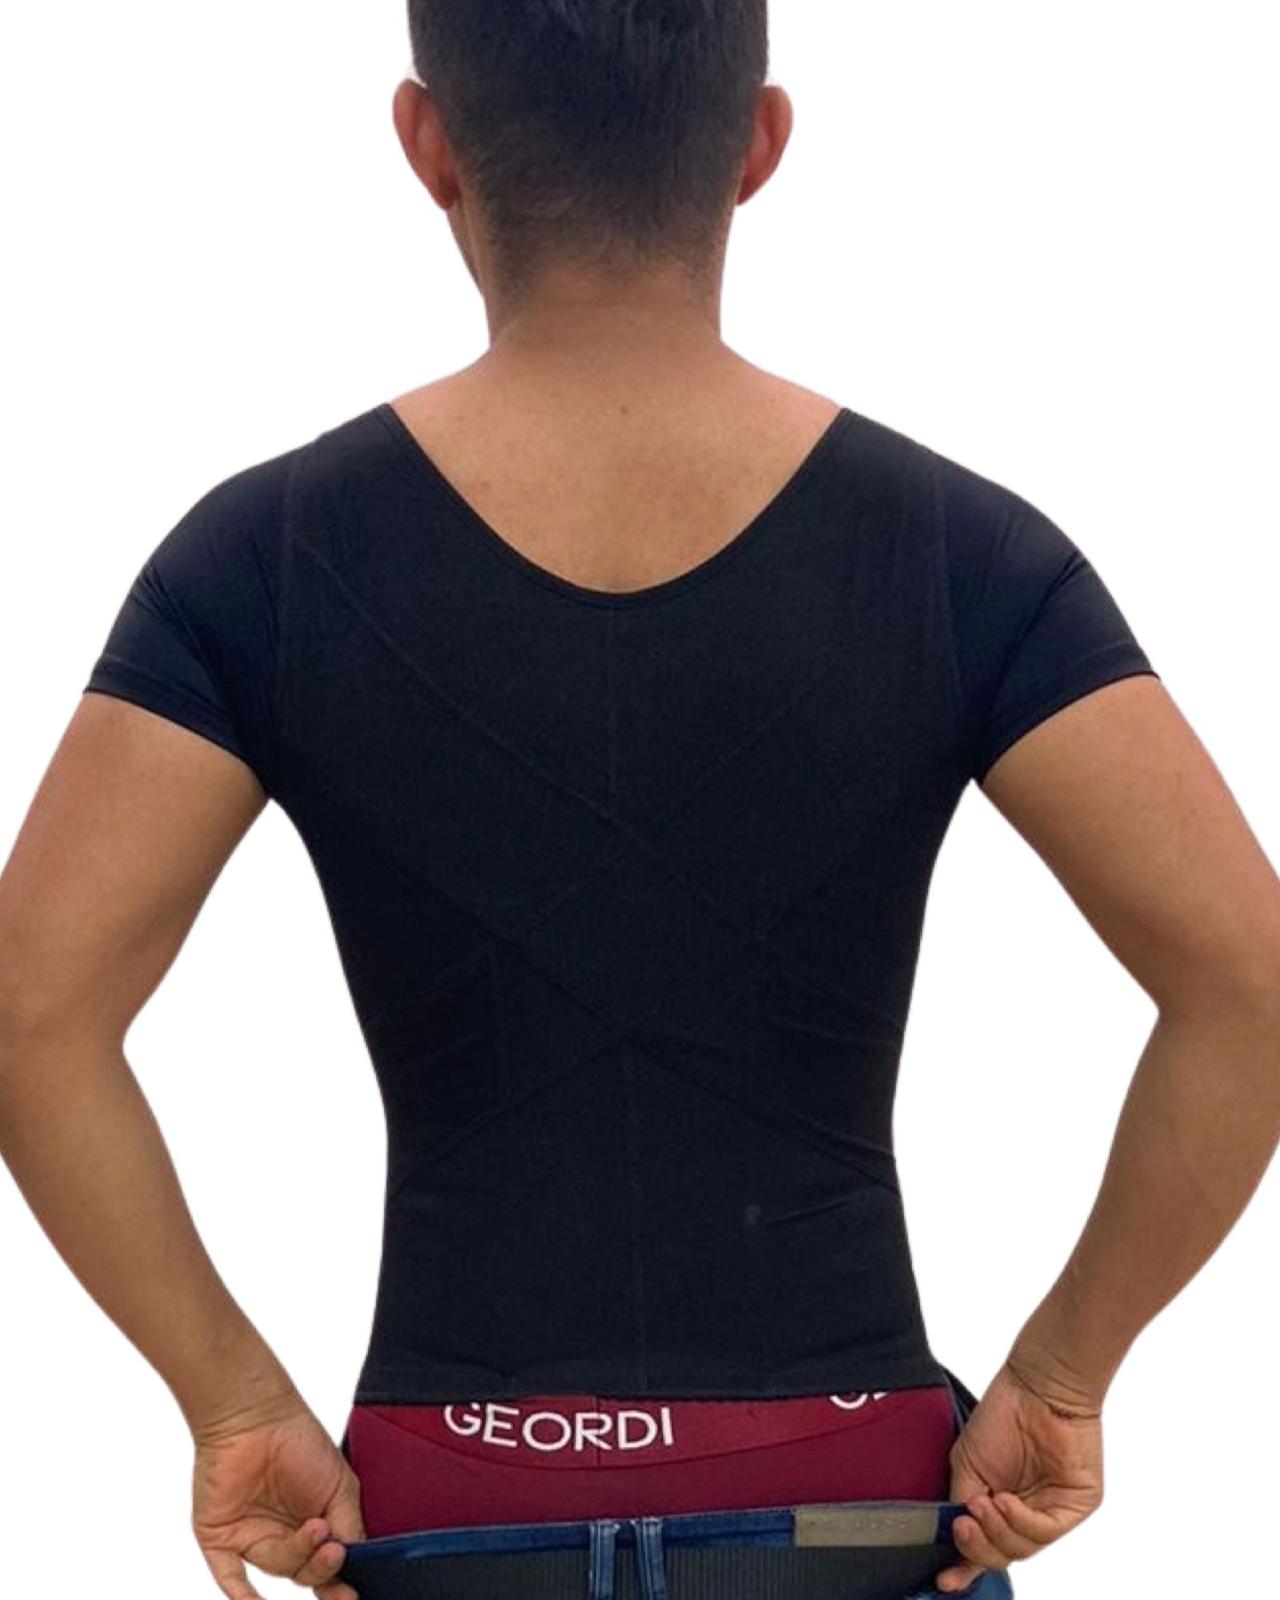 Personalized Fajas Colombianas with Built in Bra and Sleeves